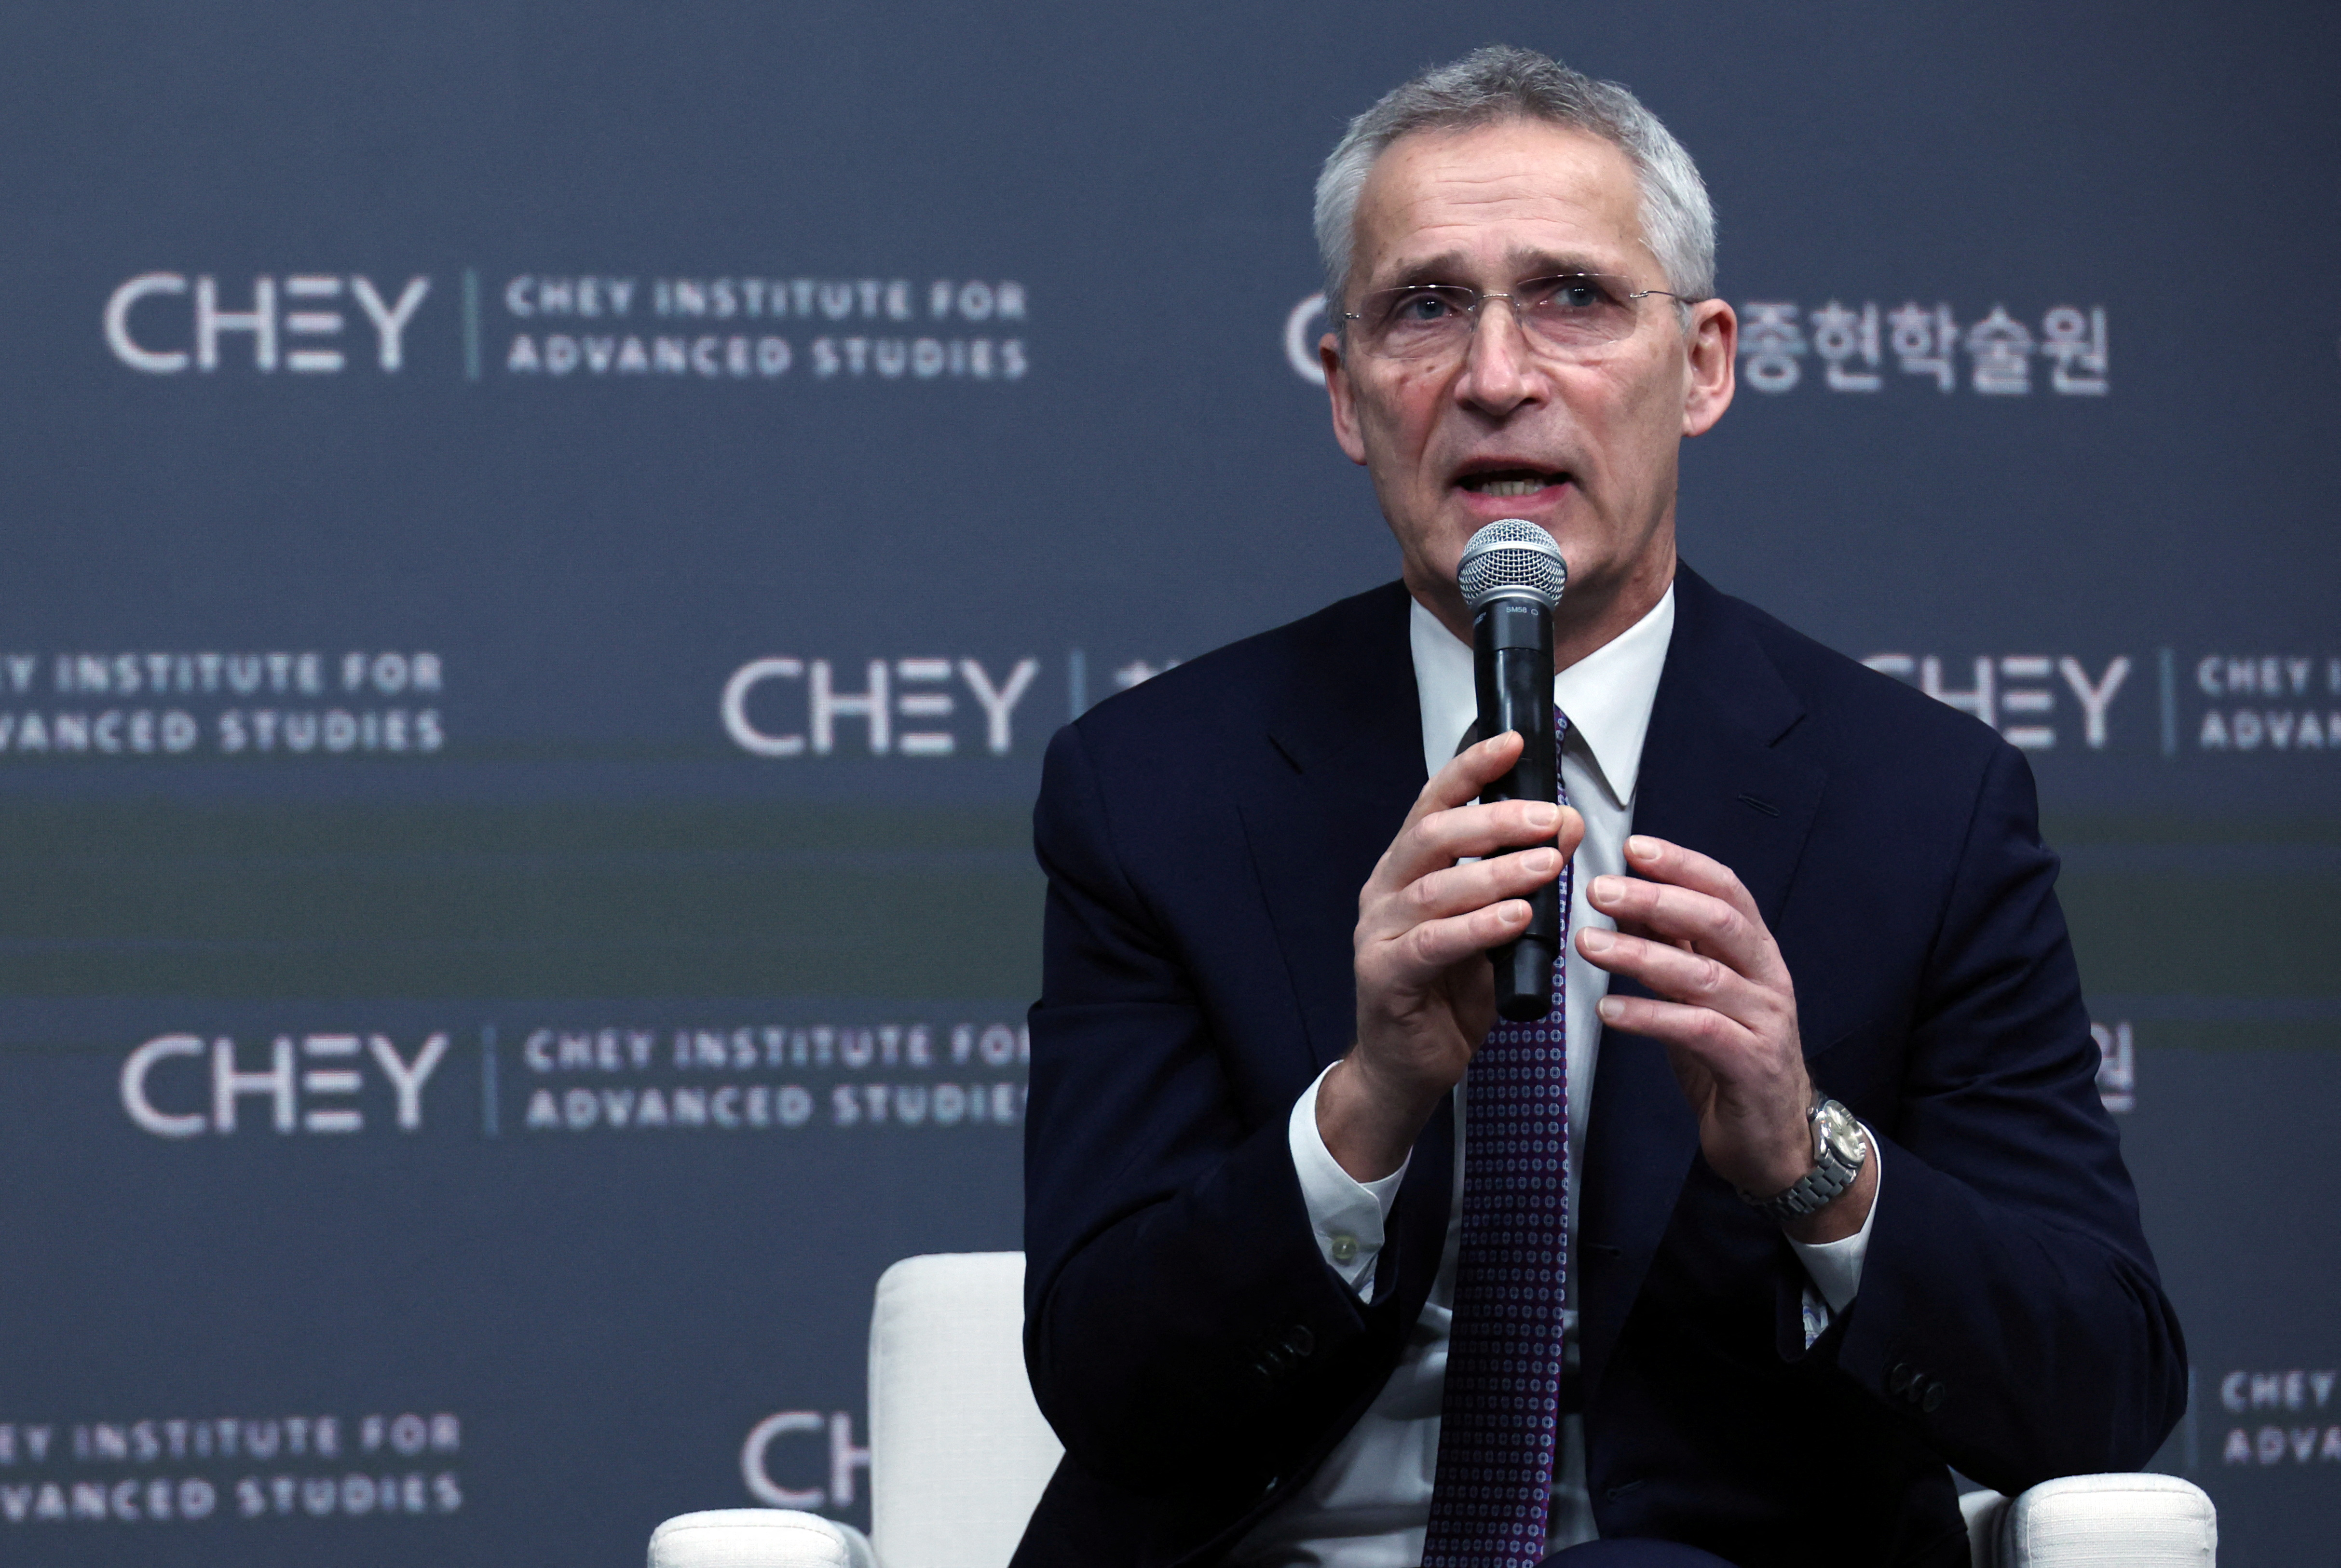 NATO Secretary General delivers remarks at the CHEY institute, in Seoul